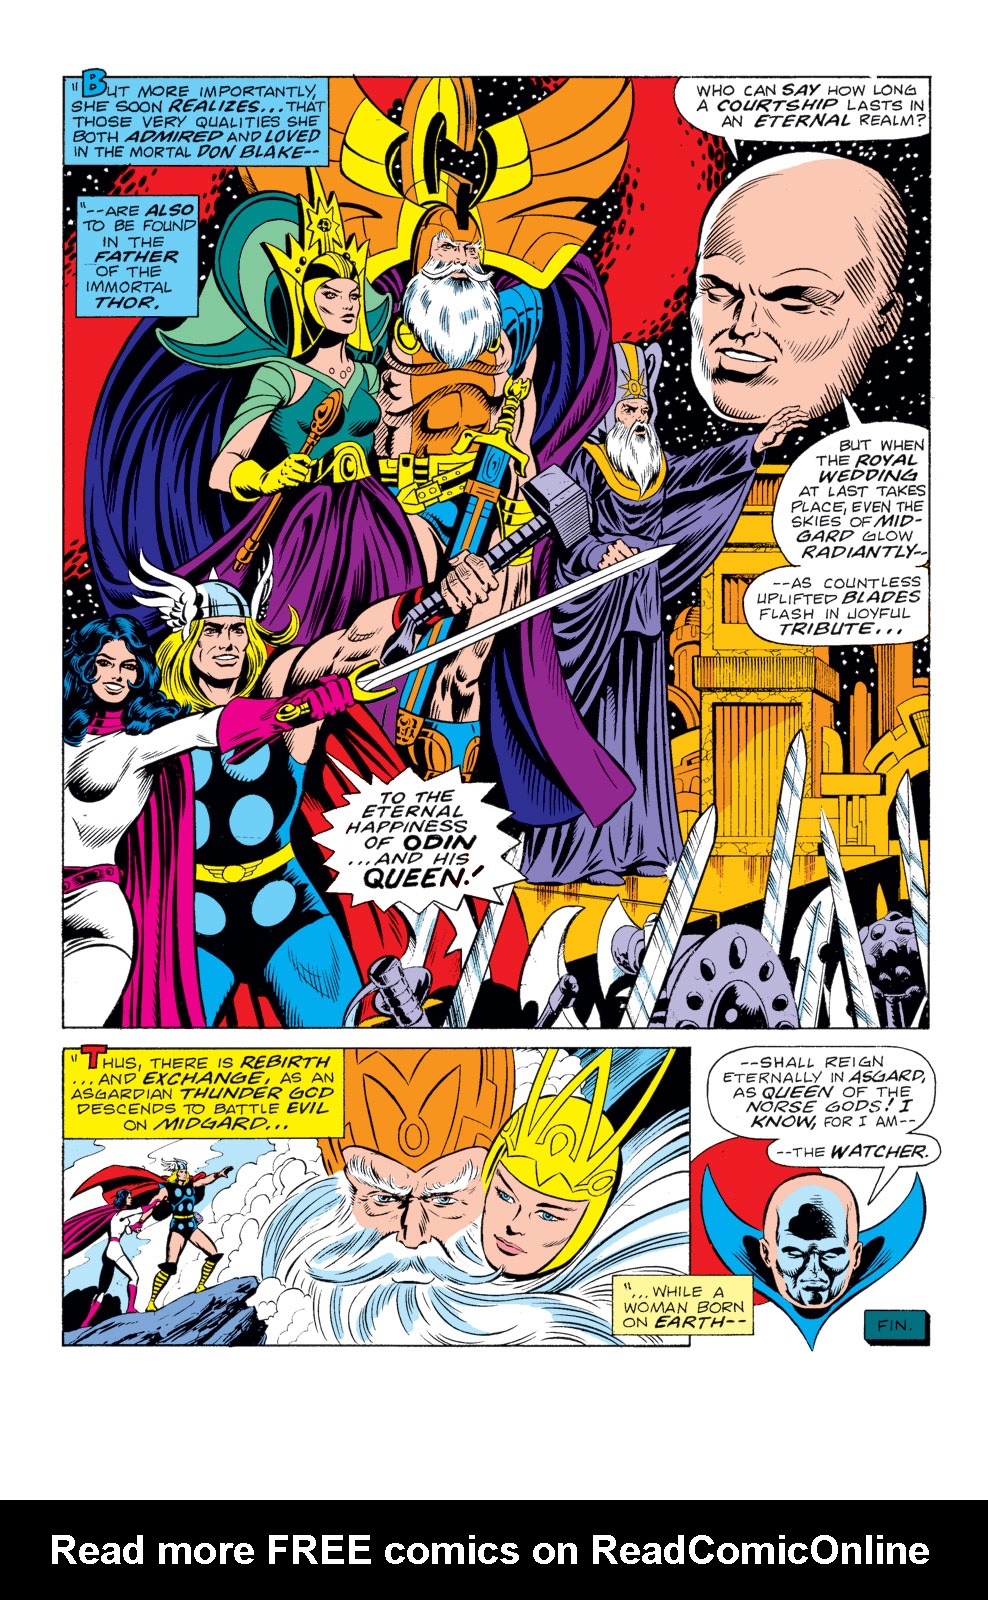 What If? (1977) issue 10 - Jane Foster had found the hammer of Thor - Page 34